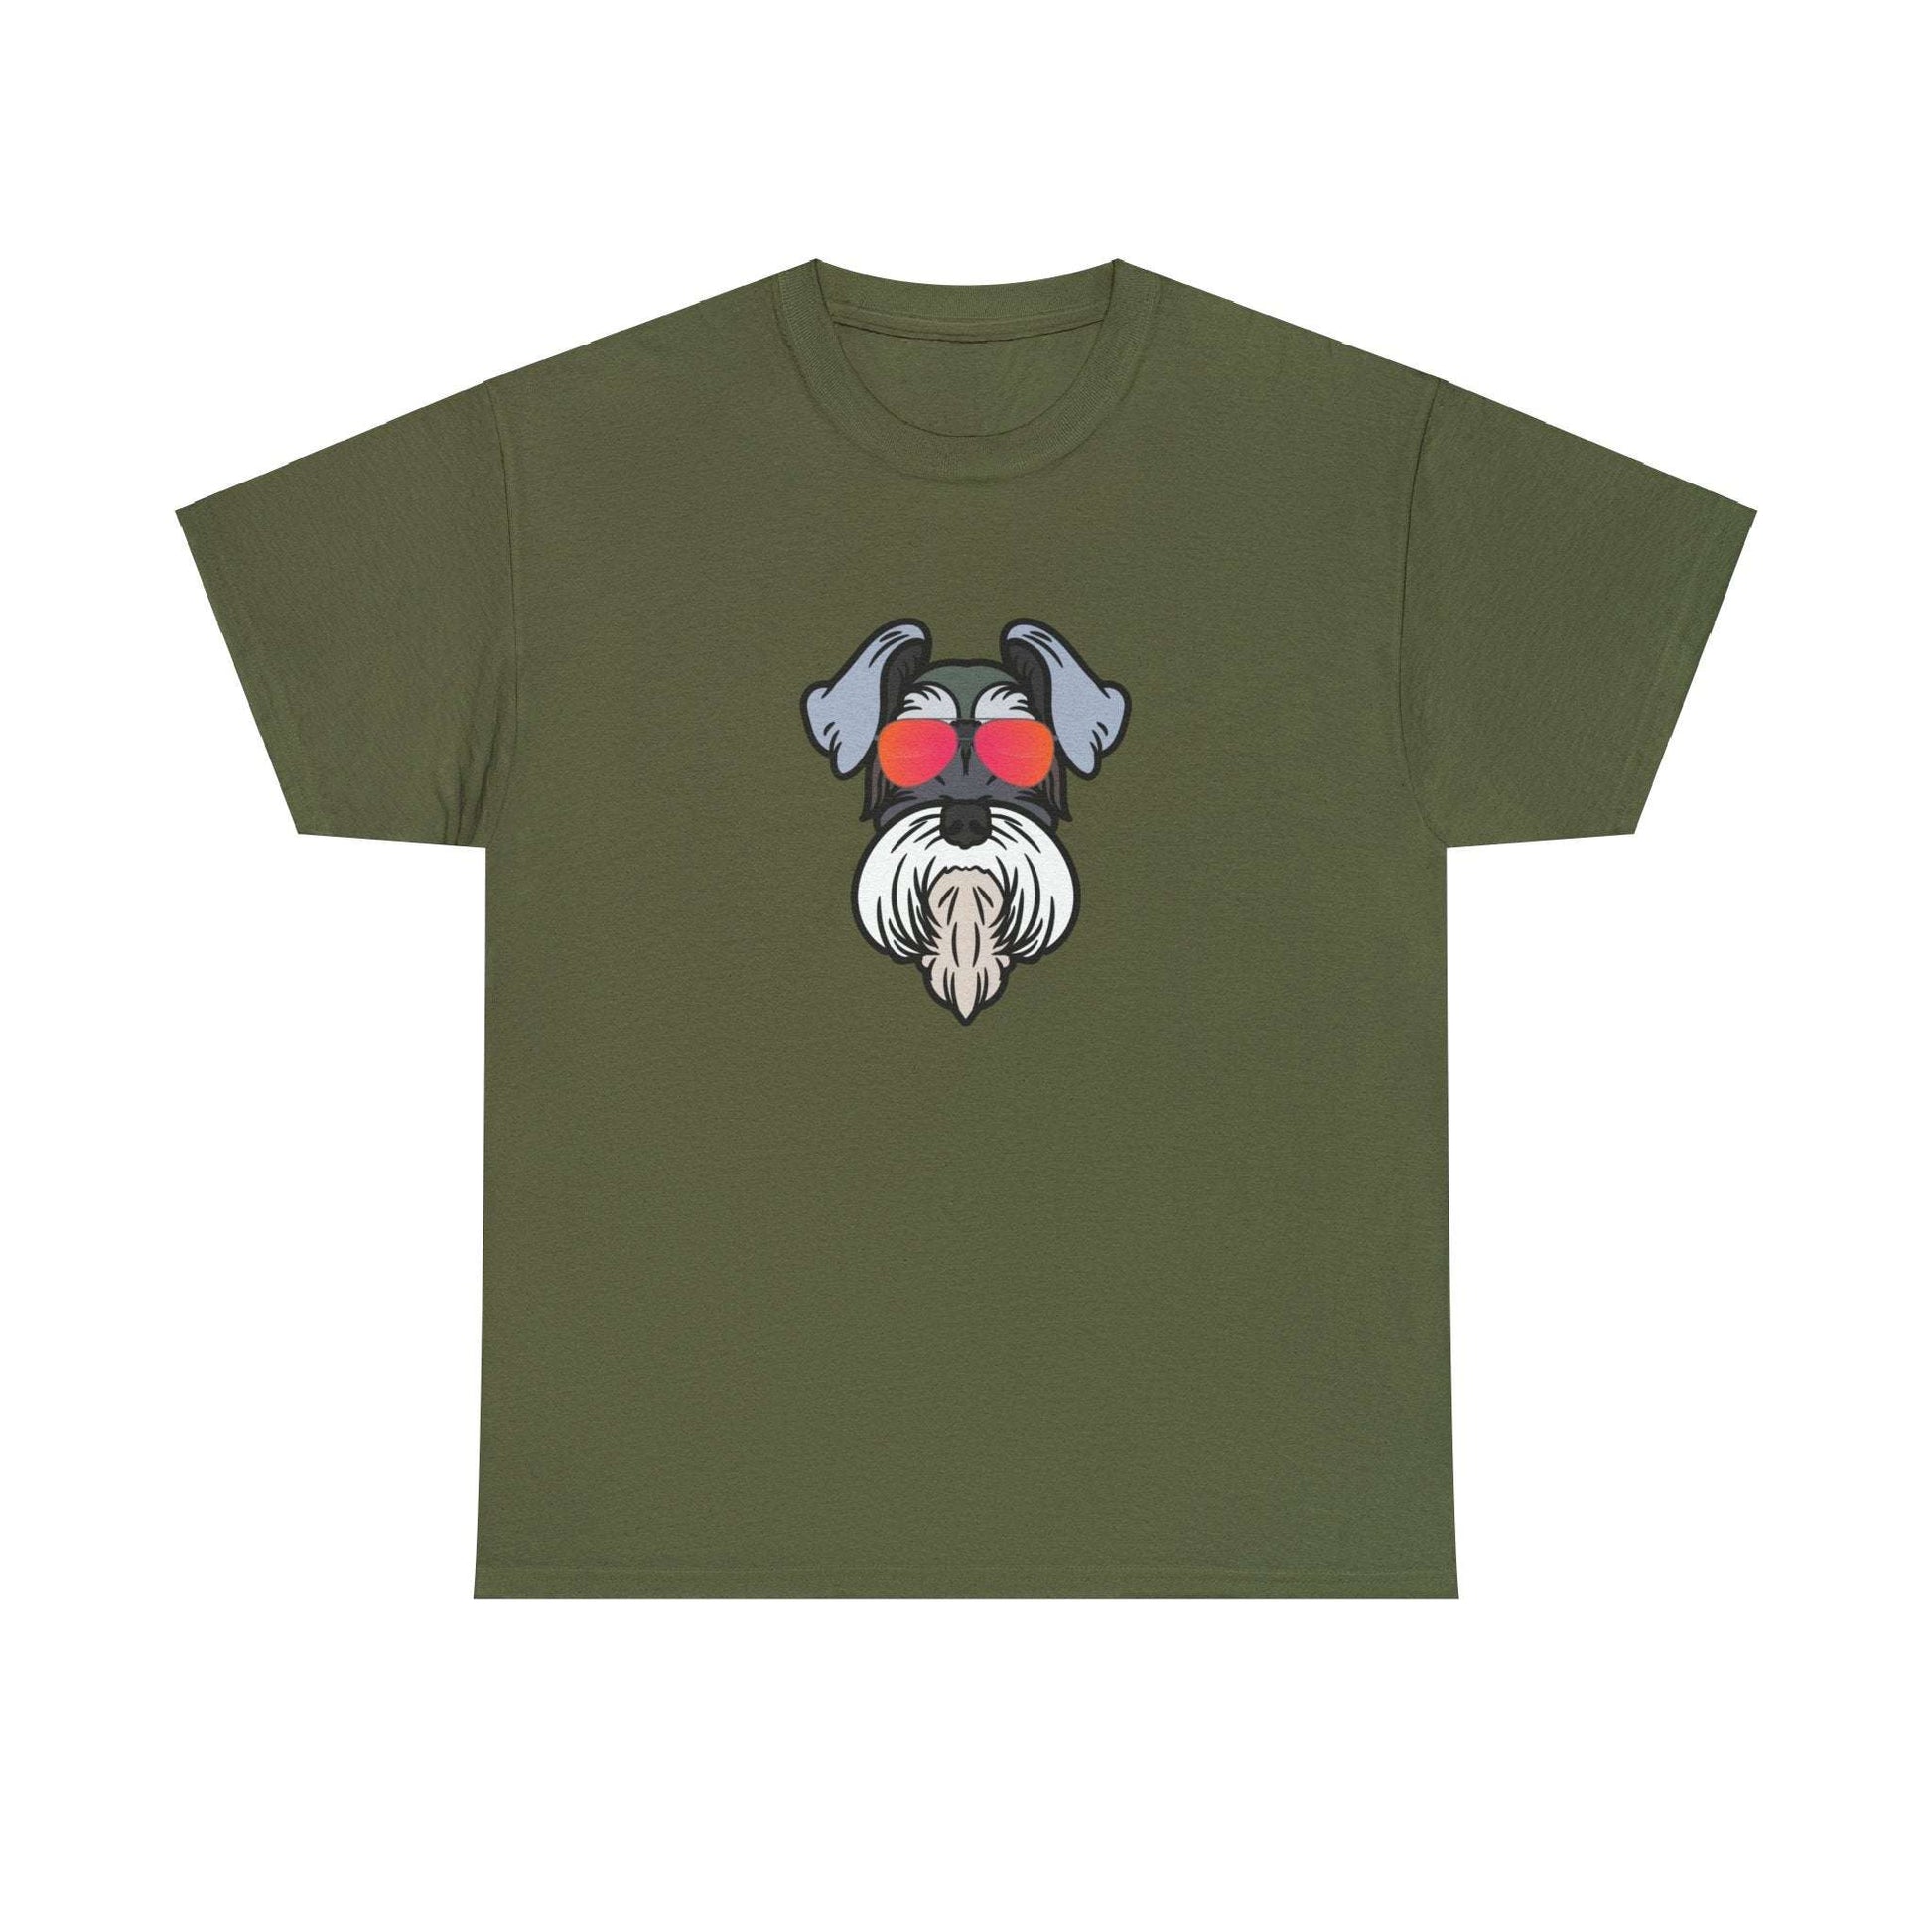 Fabulous Tee Shirts' 'Cool Schnauzer' olive t-shirt displayed to emphasize its superior quality.